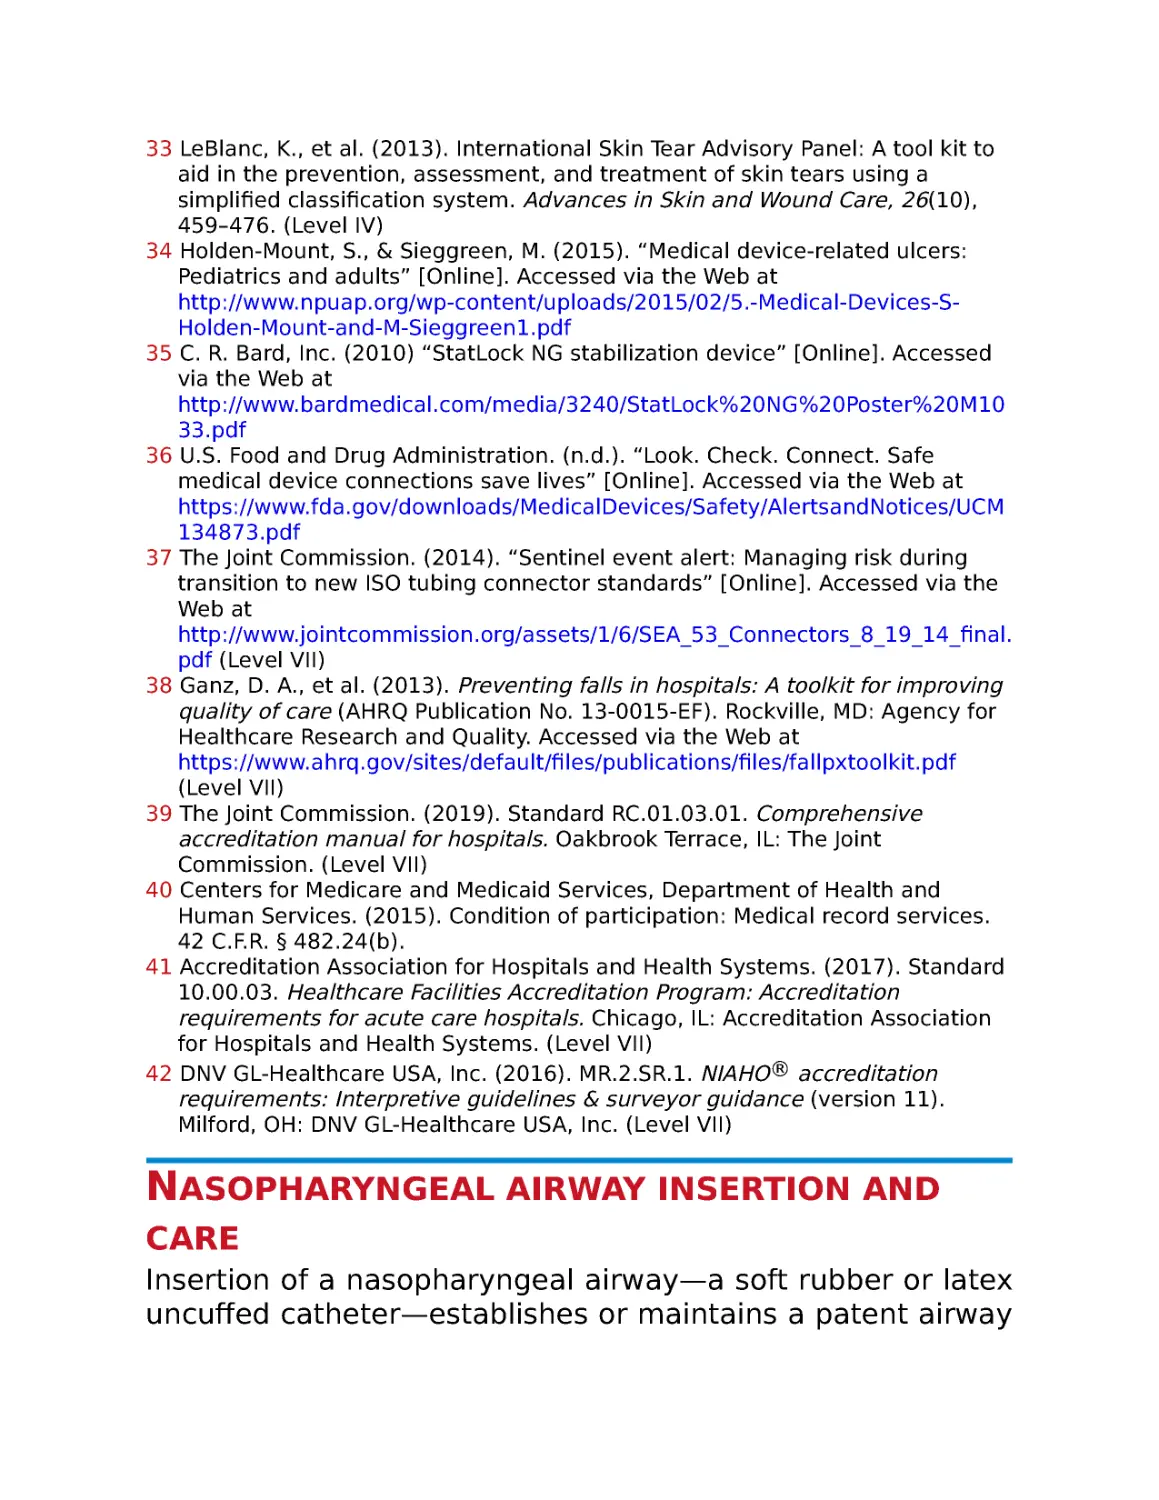 Nasopharyngeal airway insertion and care